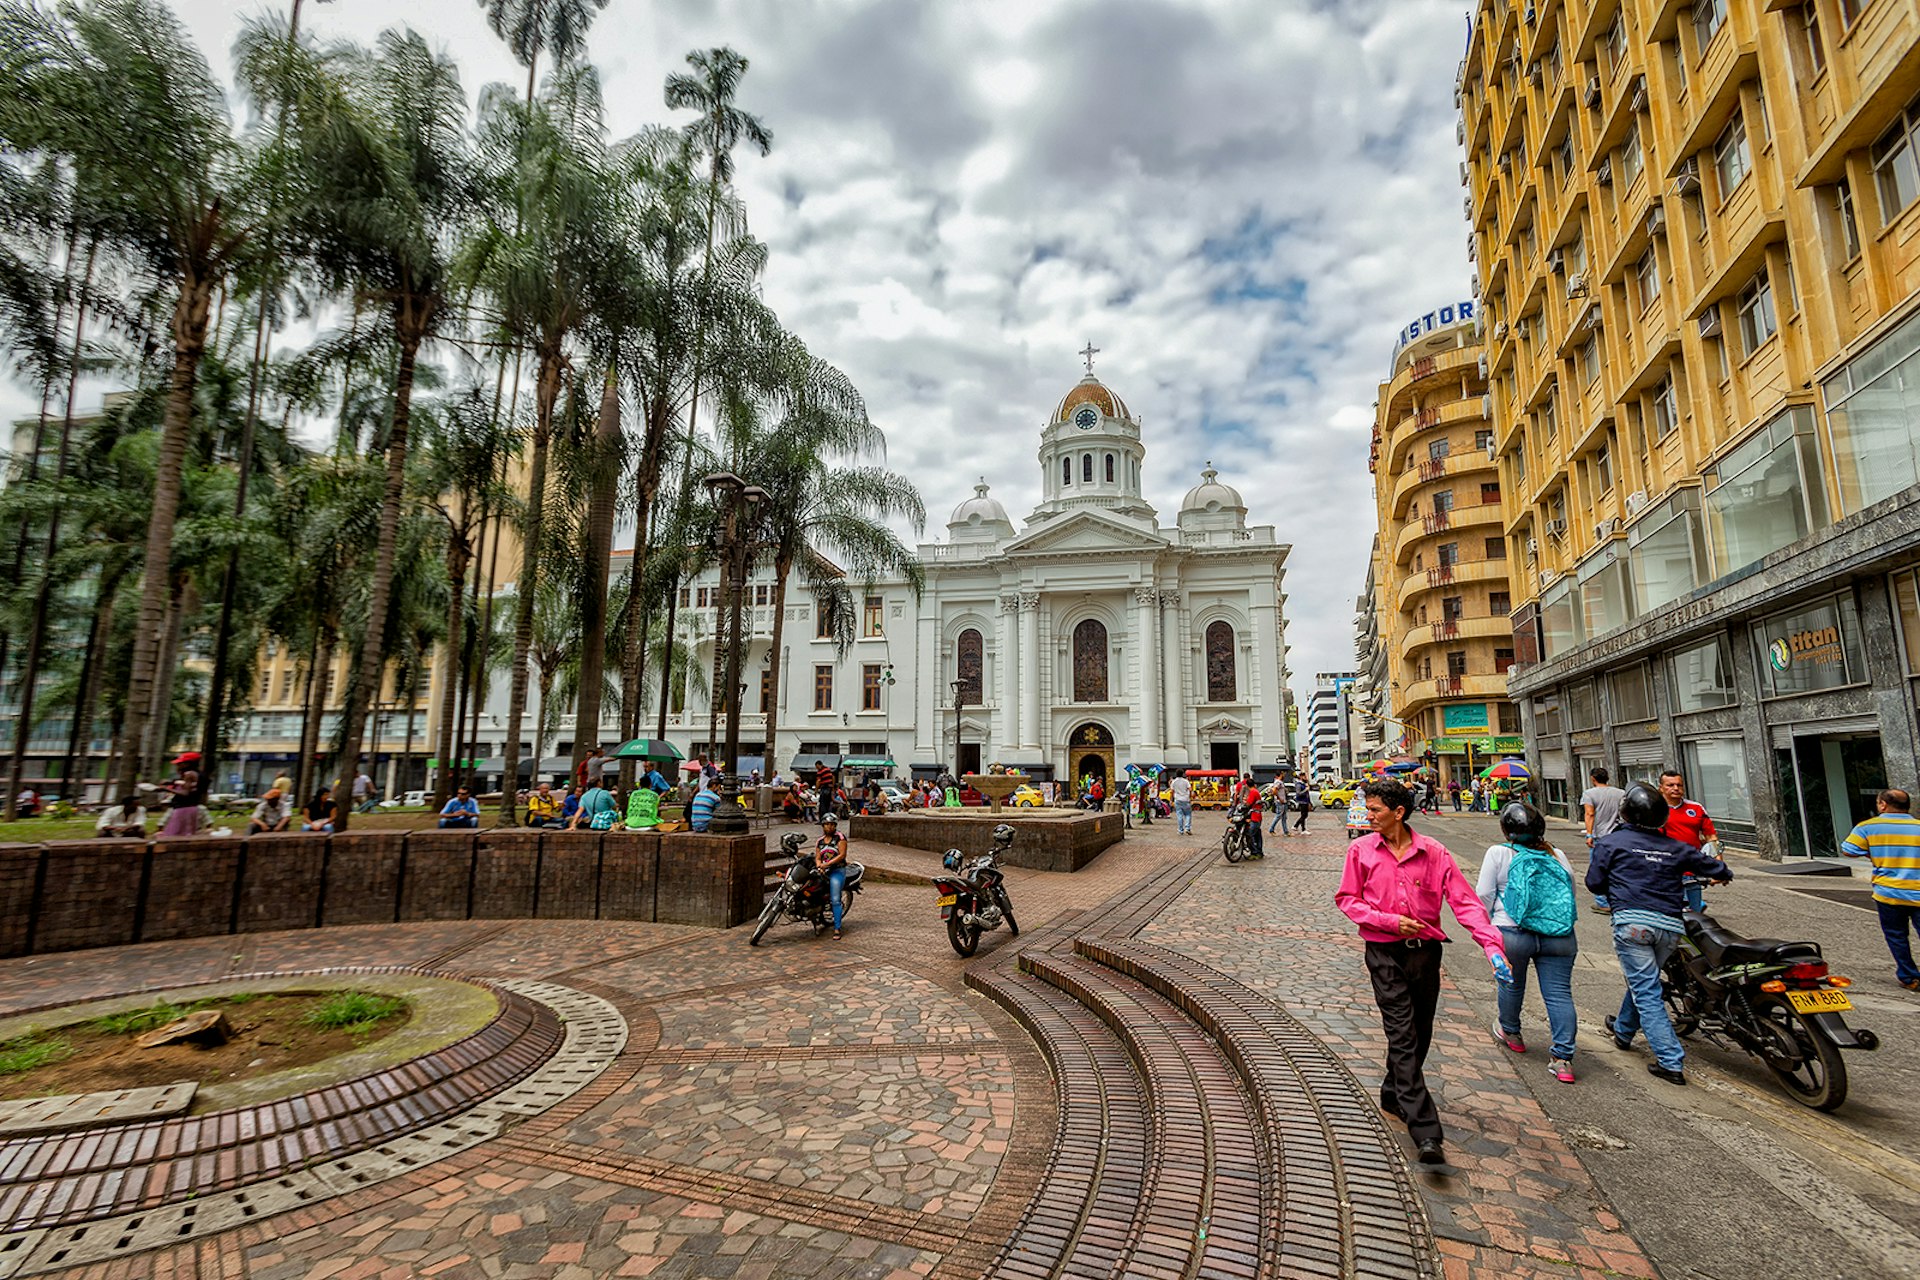 A man in a pink shirt walks through a colonial plaza in Cali